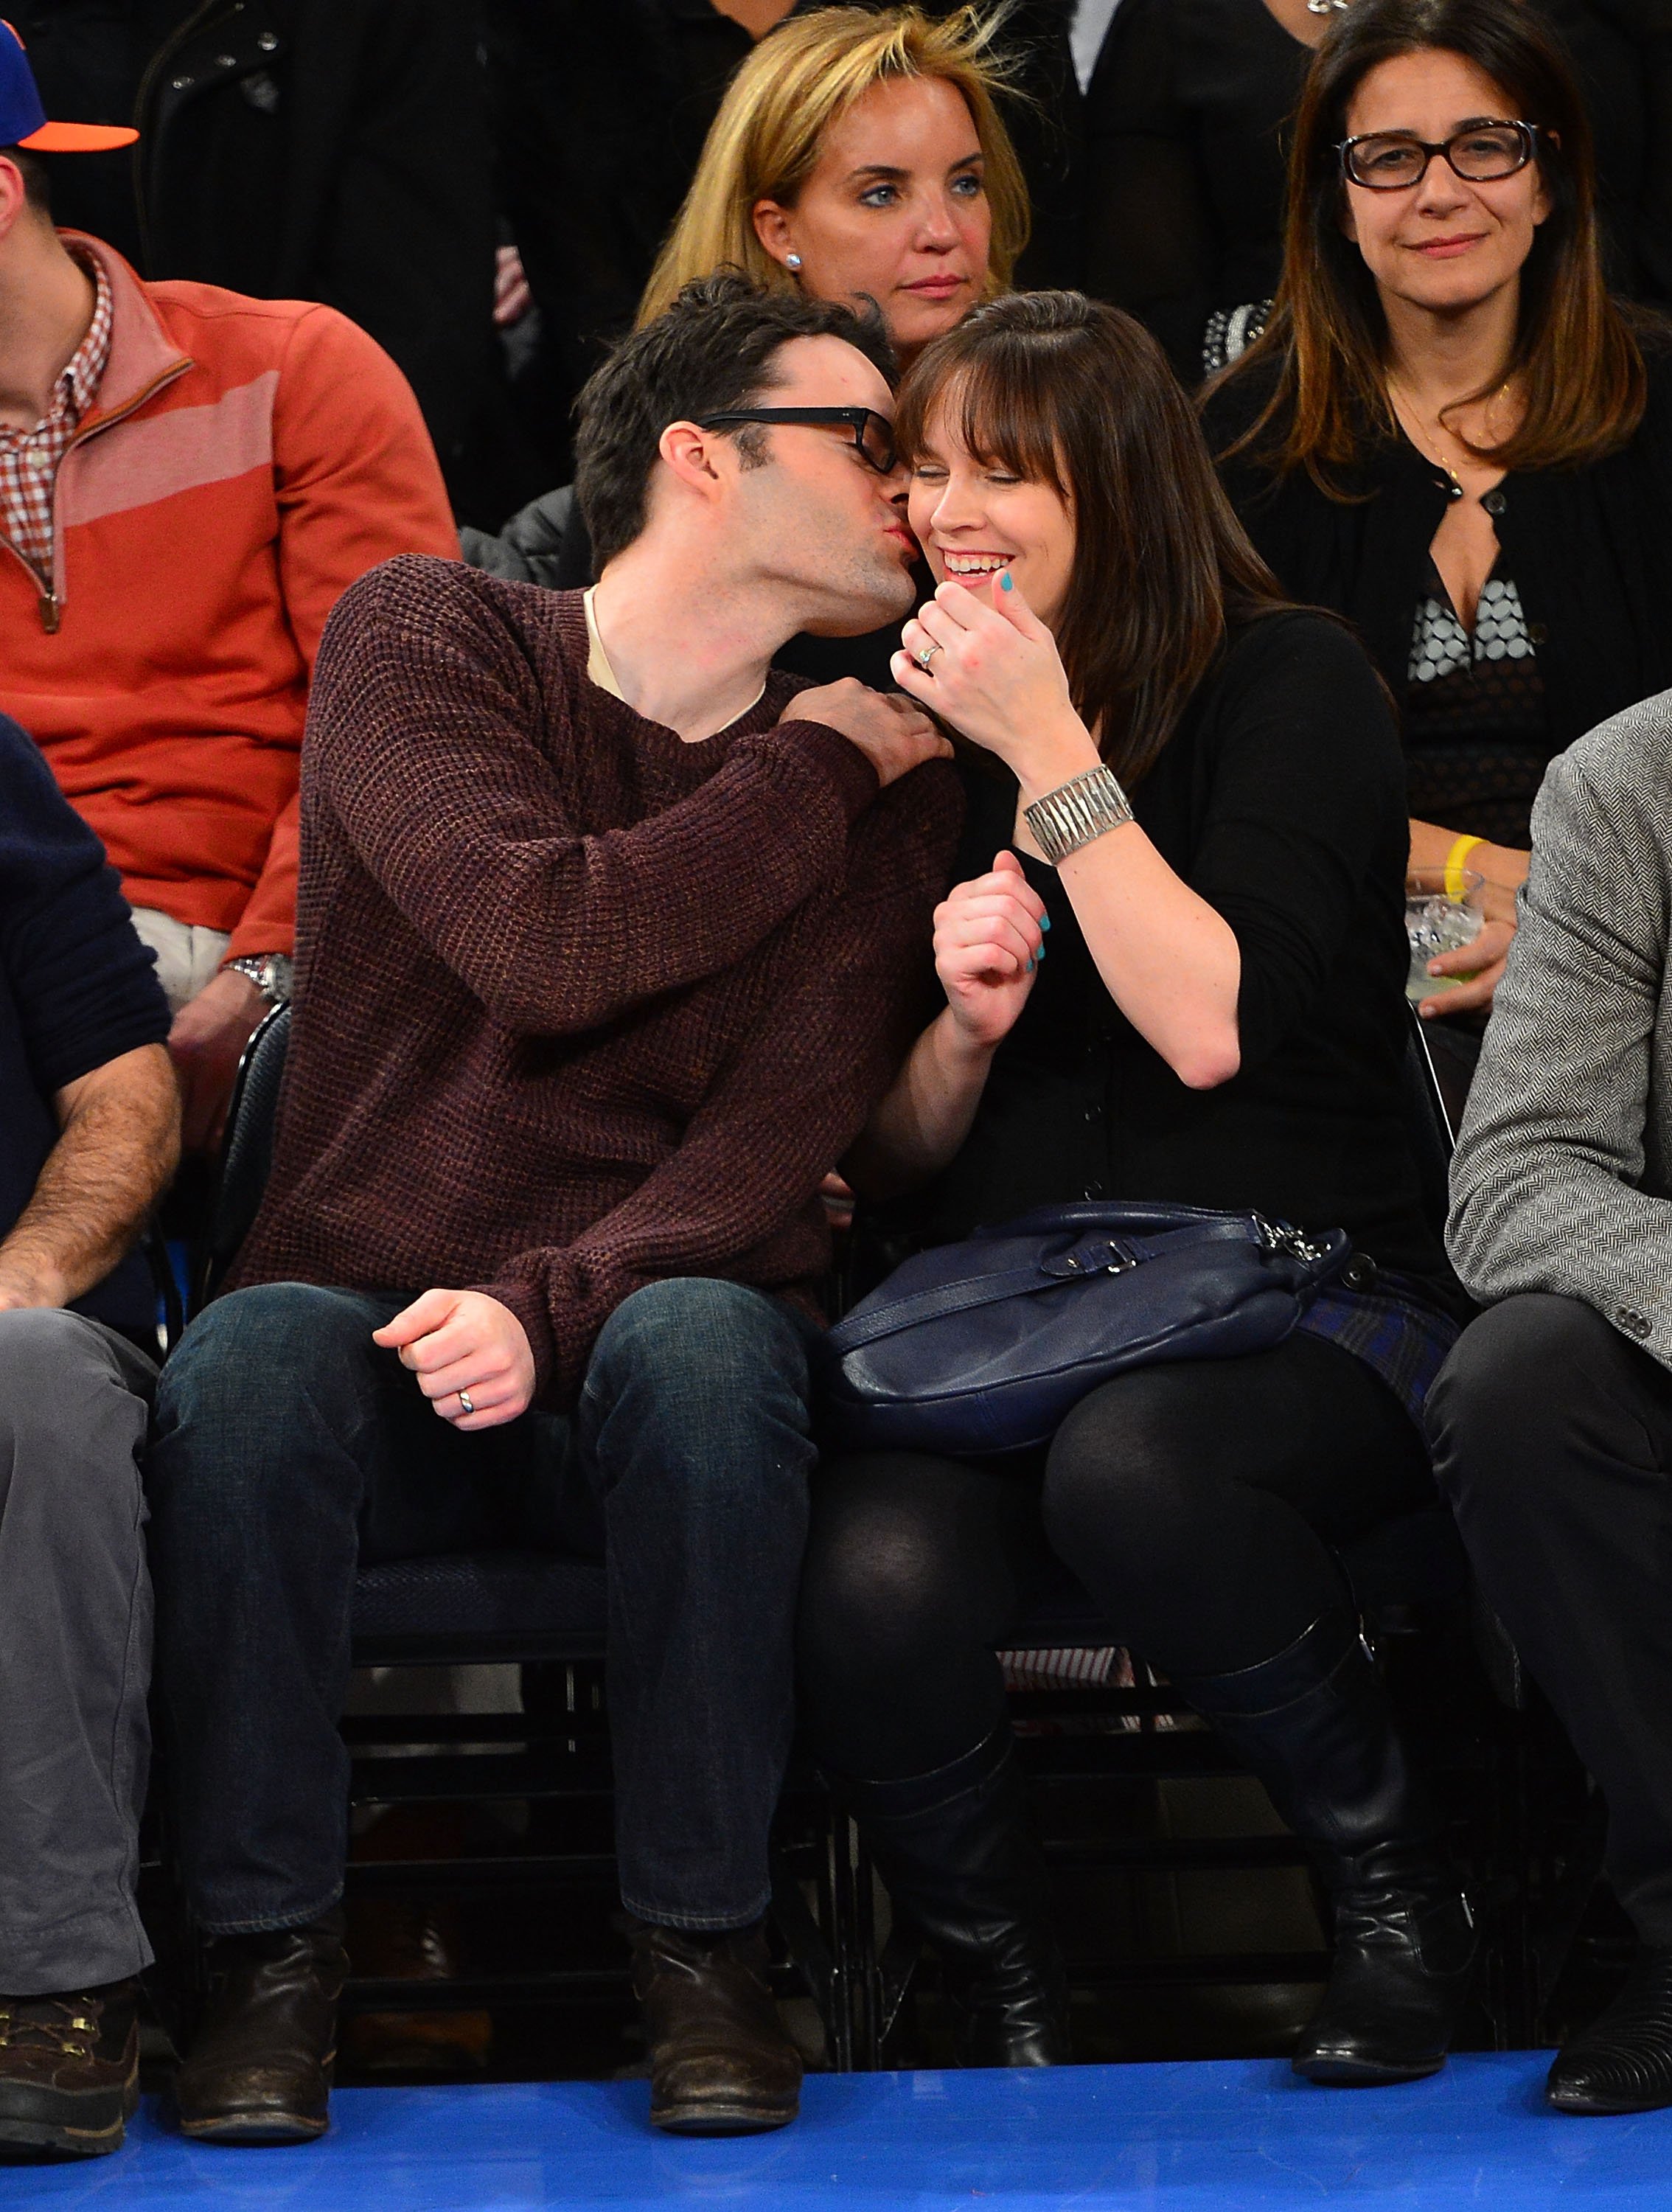 Bill Hader kisses Maggie Carey on her cheek as they attend the basketball game betwene San Antonio Spurs and New York Knicks at Madison Square Garden on January 3, 2013, in New York City. | Source: Getty Images